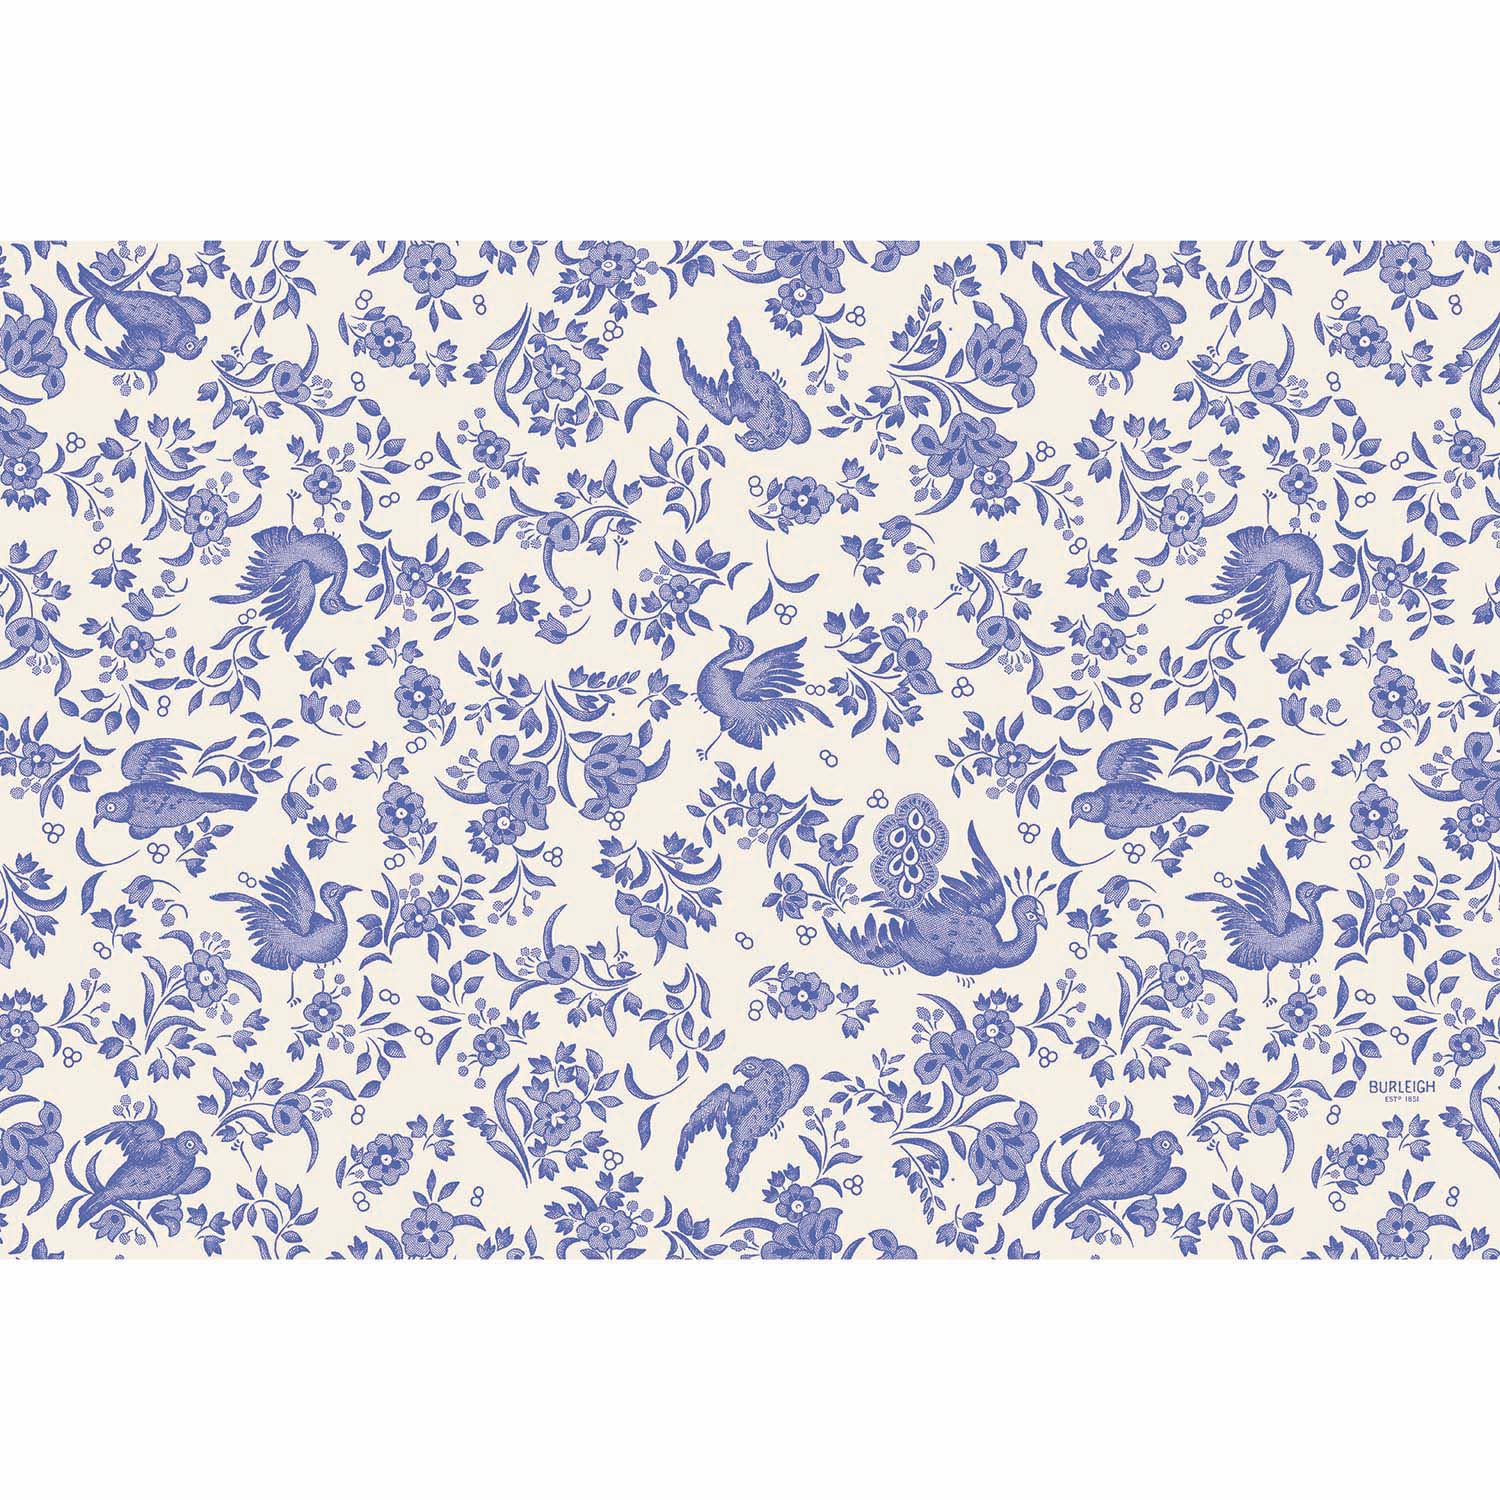 A Blue Regal Peacock Paper Placemat from Hester &amp; Cook, featuring a blue and white floral pattern on a white background, inspired by the ornamental bird pattern from Burleigh.